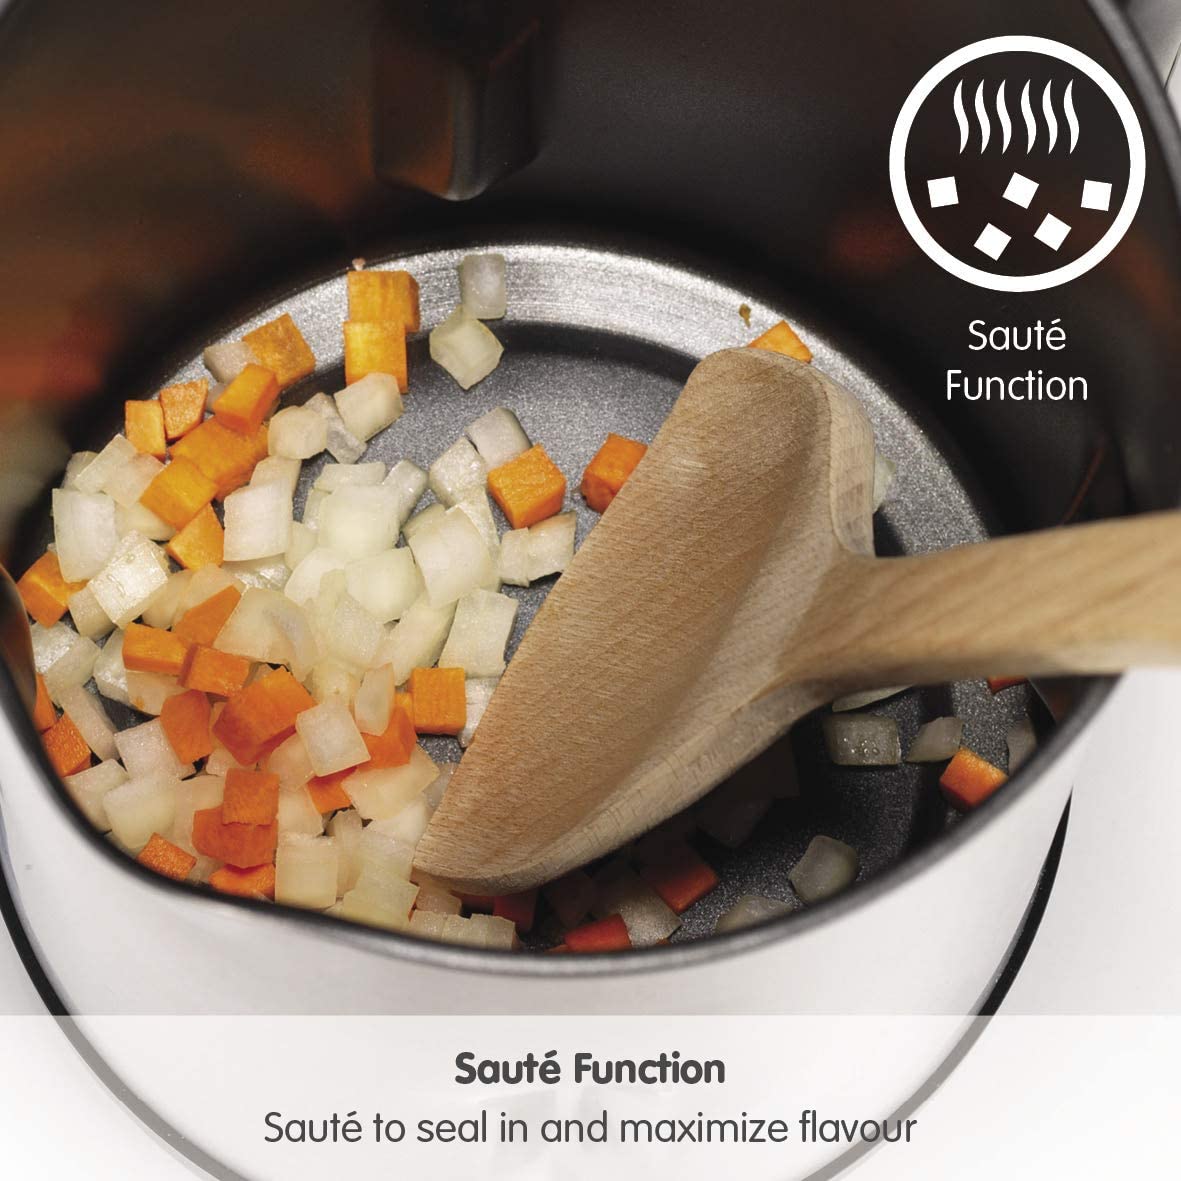 Morphy Richards 501014 Saute and Soup Maker 1100W Brushed Stainless Steel